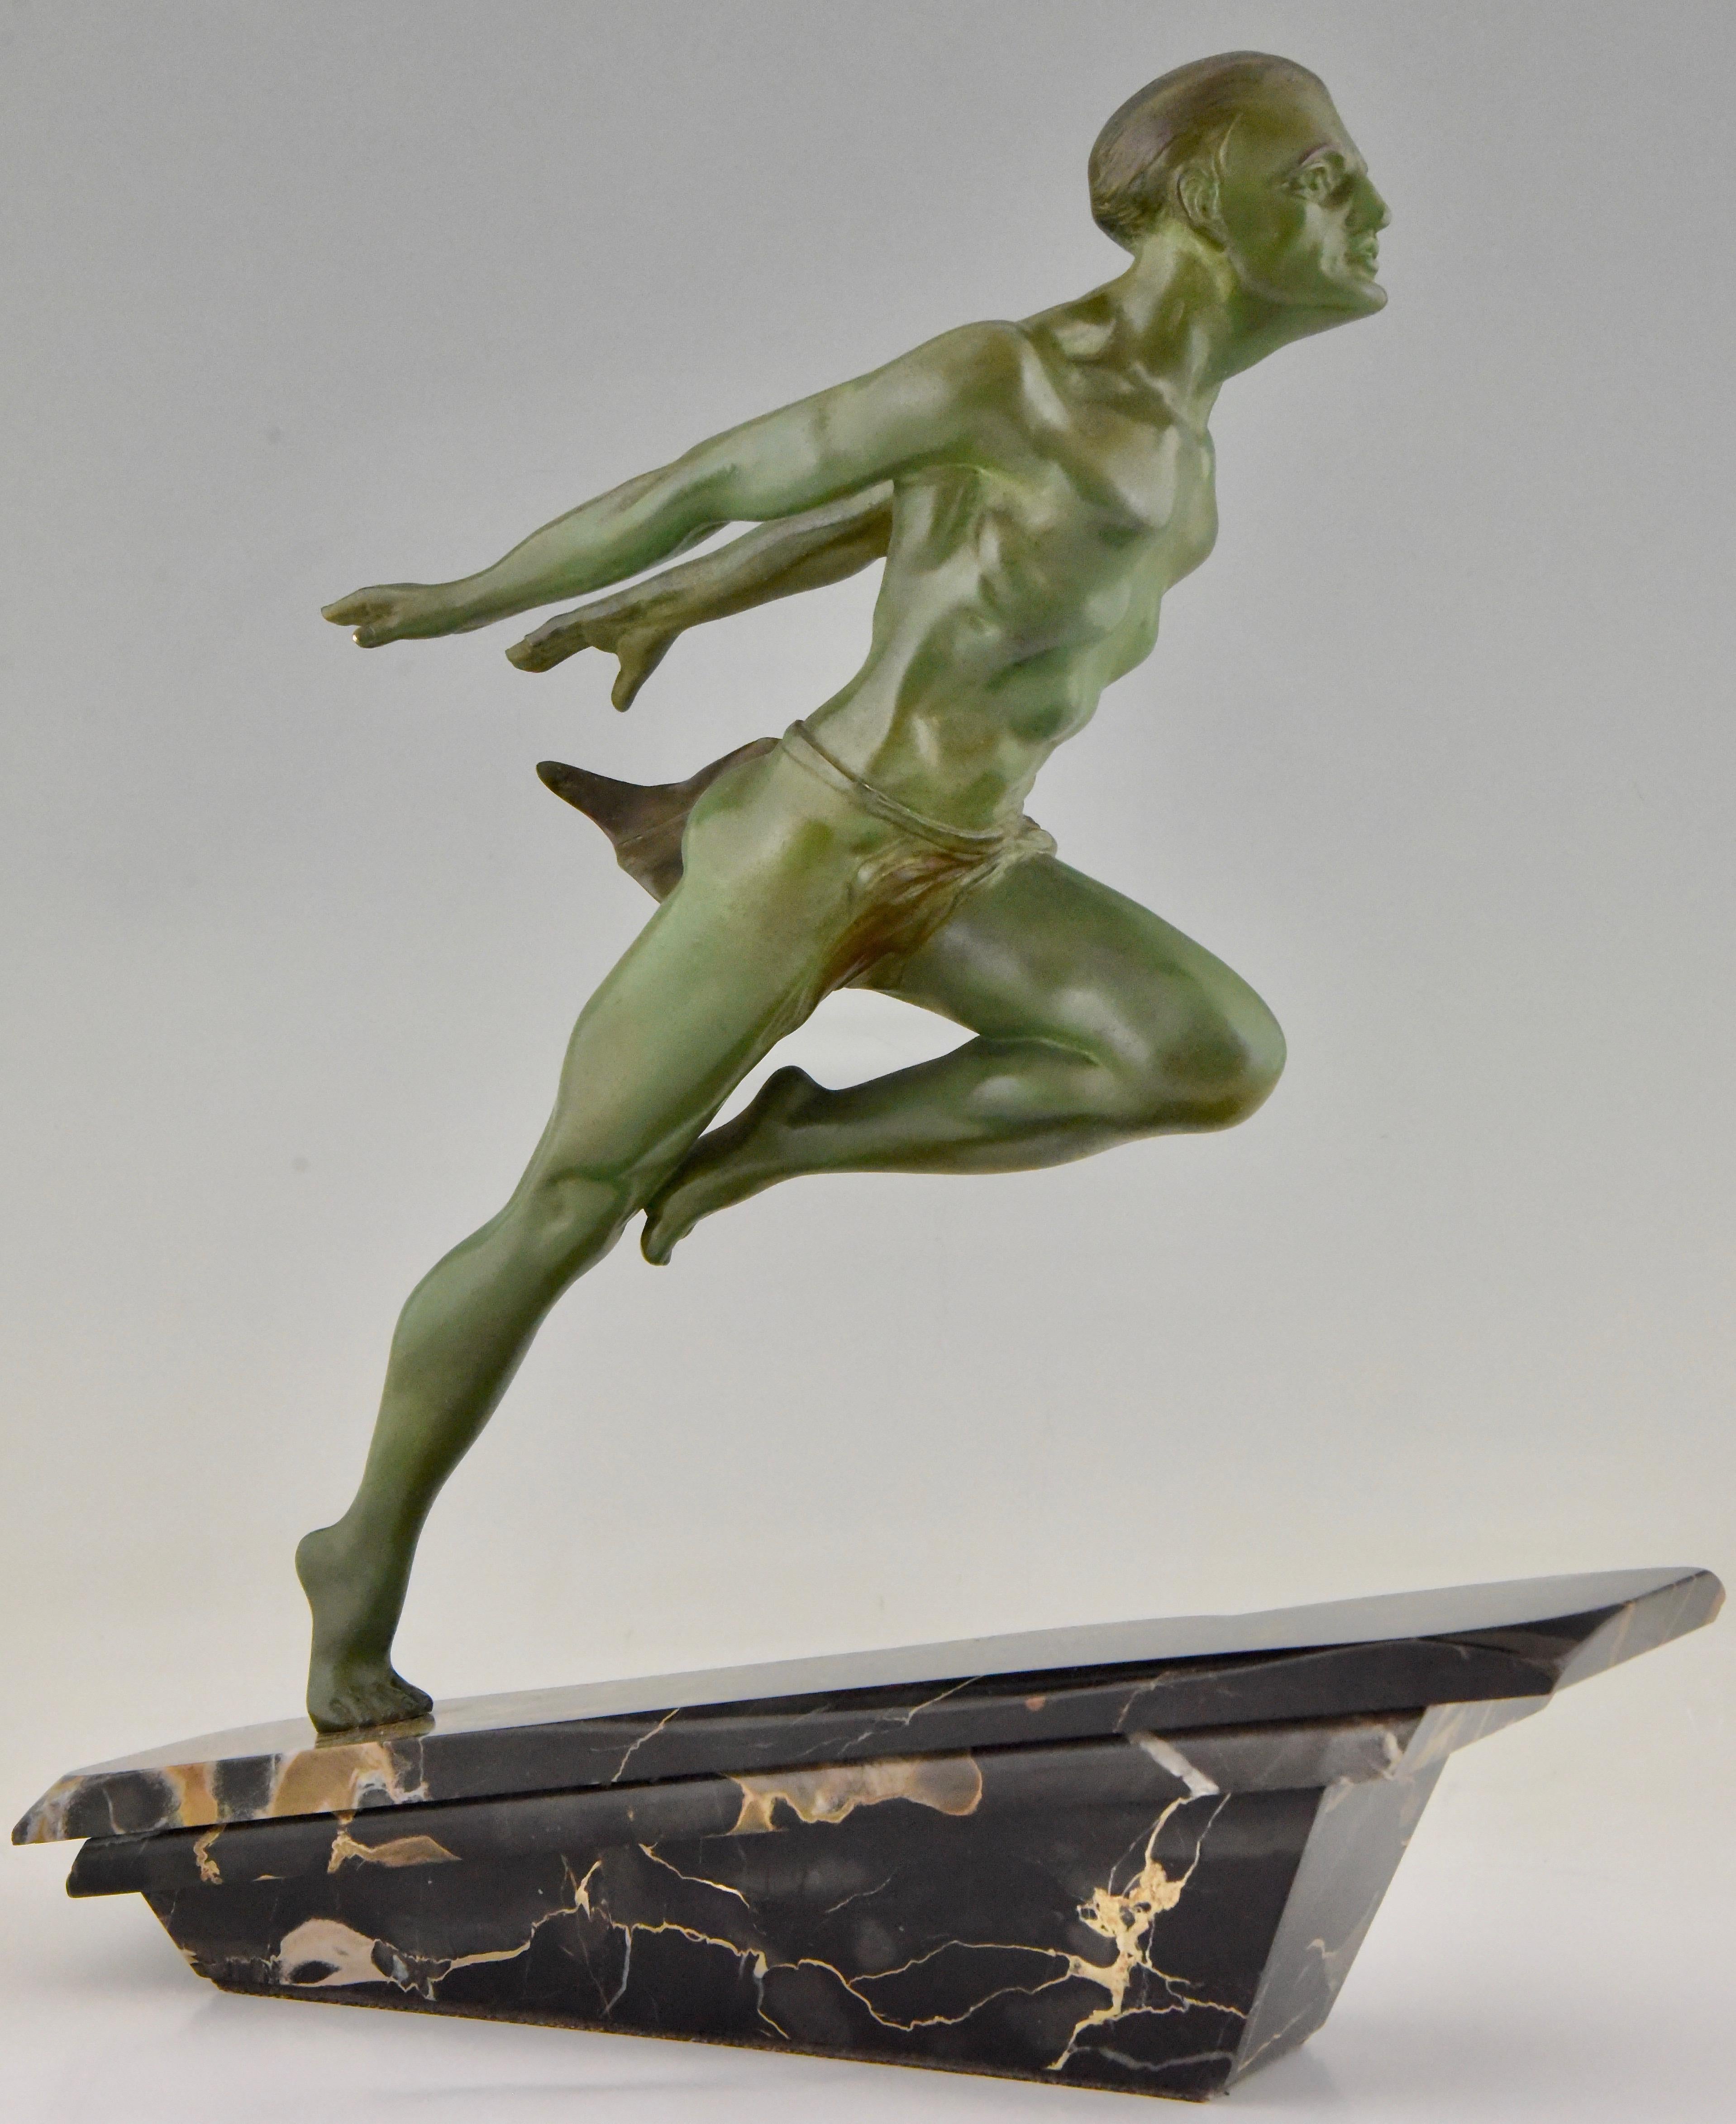 Art Deco running man statue by L Valderi French, circa 1930. Verdigris patina metal sculpture on sculpted portoro angled marble base. The movement of the man, reminiscent of the great male statue known by Jean de Roncourt. This one is signed L.